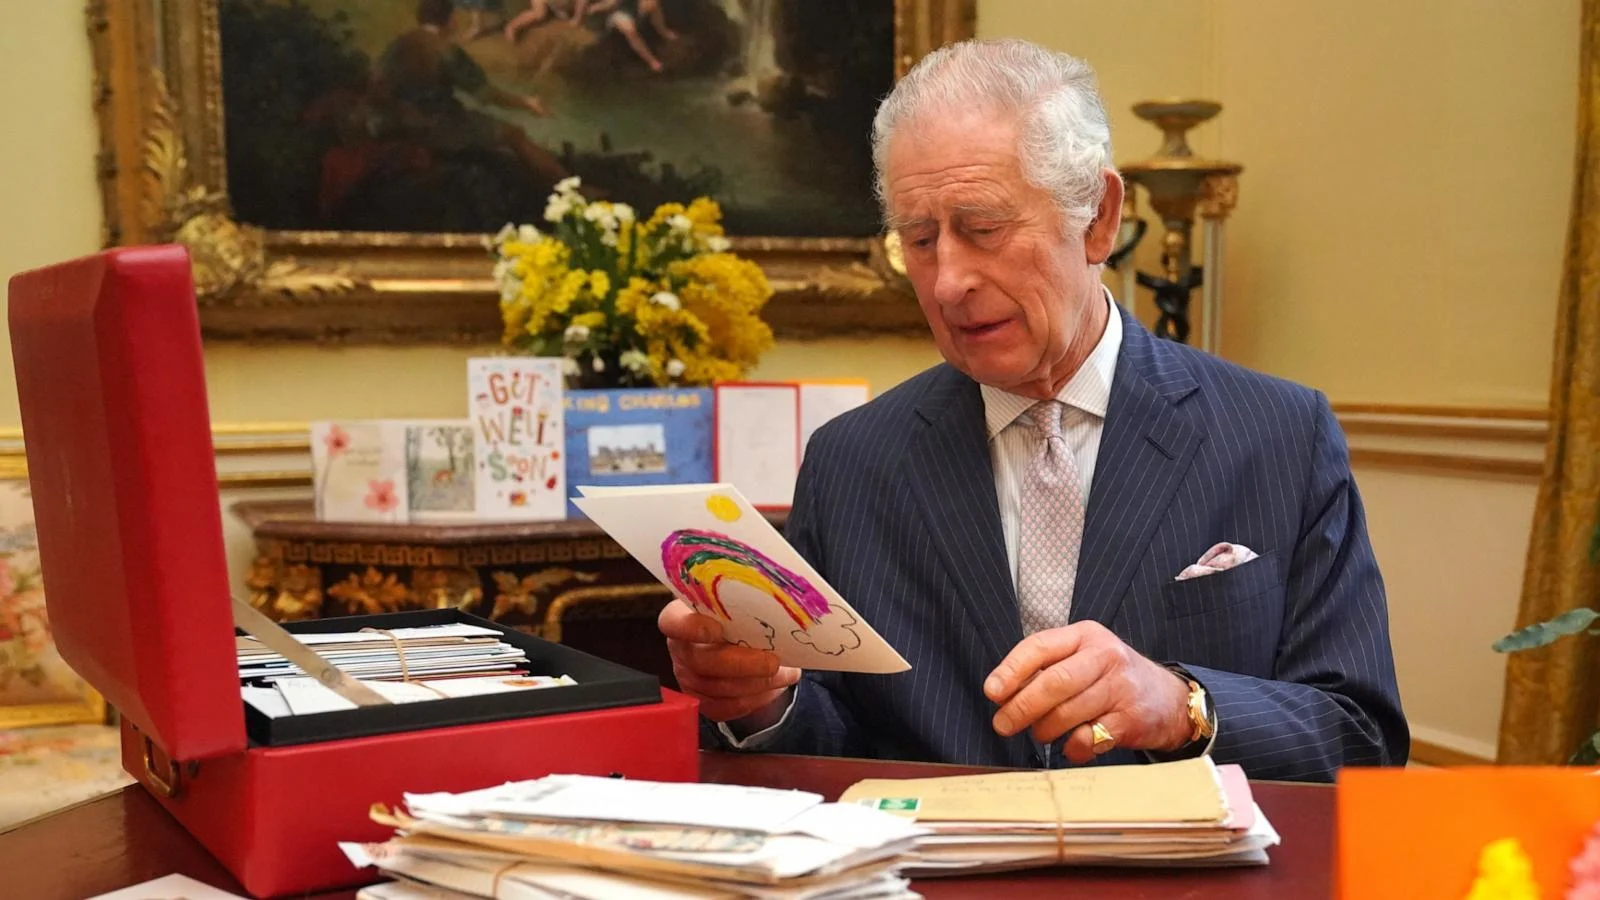 King Charles III seen in new photos after cancer diagnosis